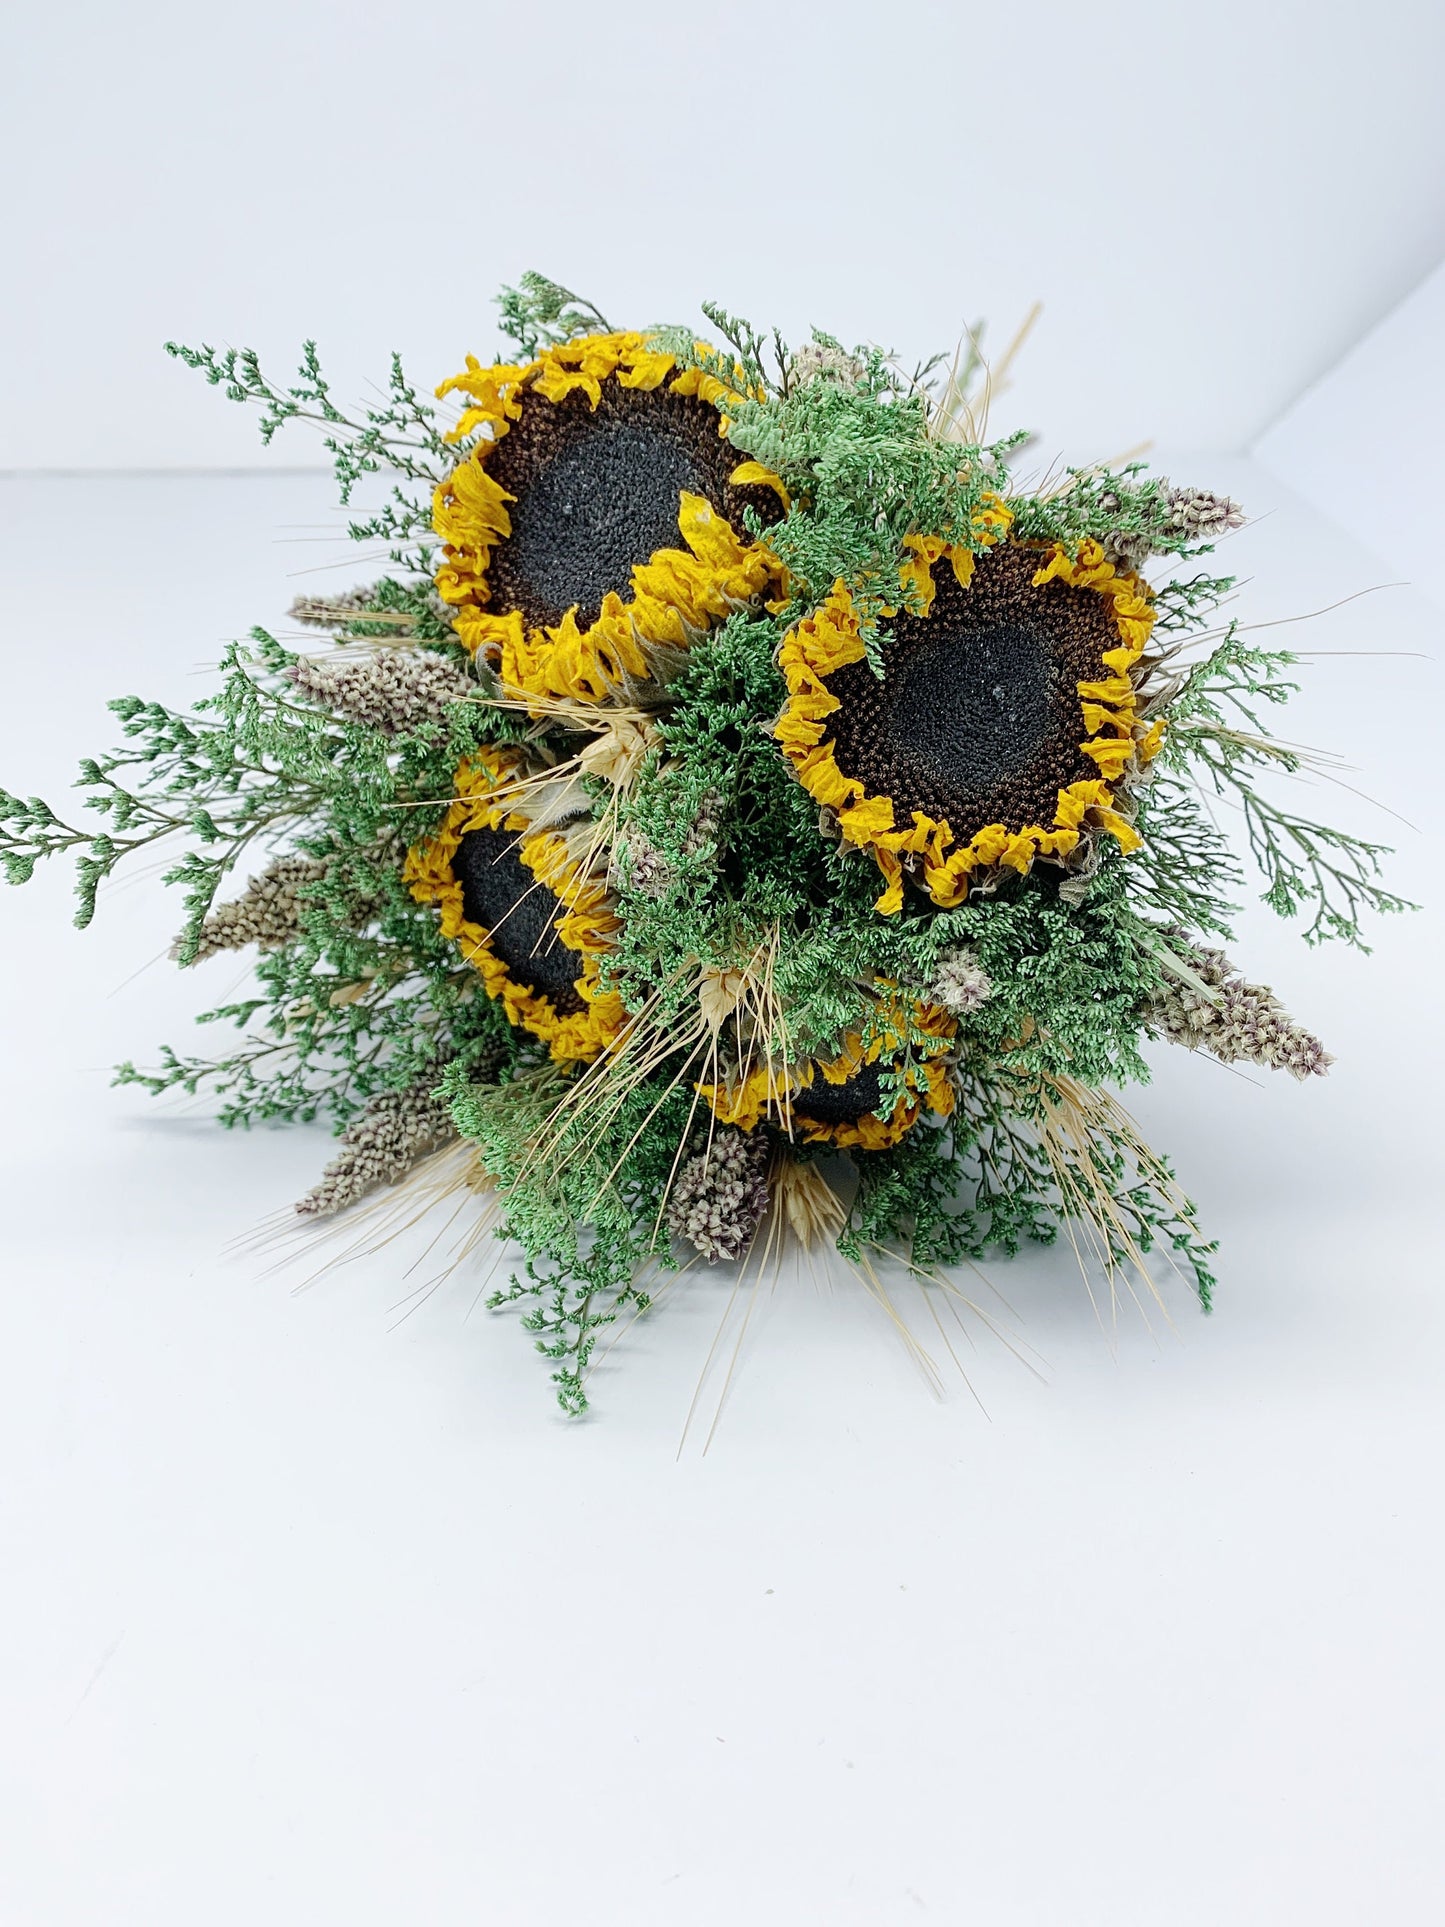 Sunflower Bouquet, Dried Flowers, Preserved, Lace Ribbon, Sunflower, Green Caspia, House Decoration, Wedding, Summer, Rustic